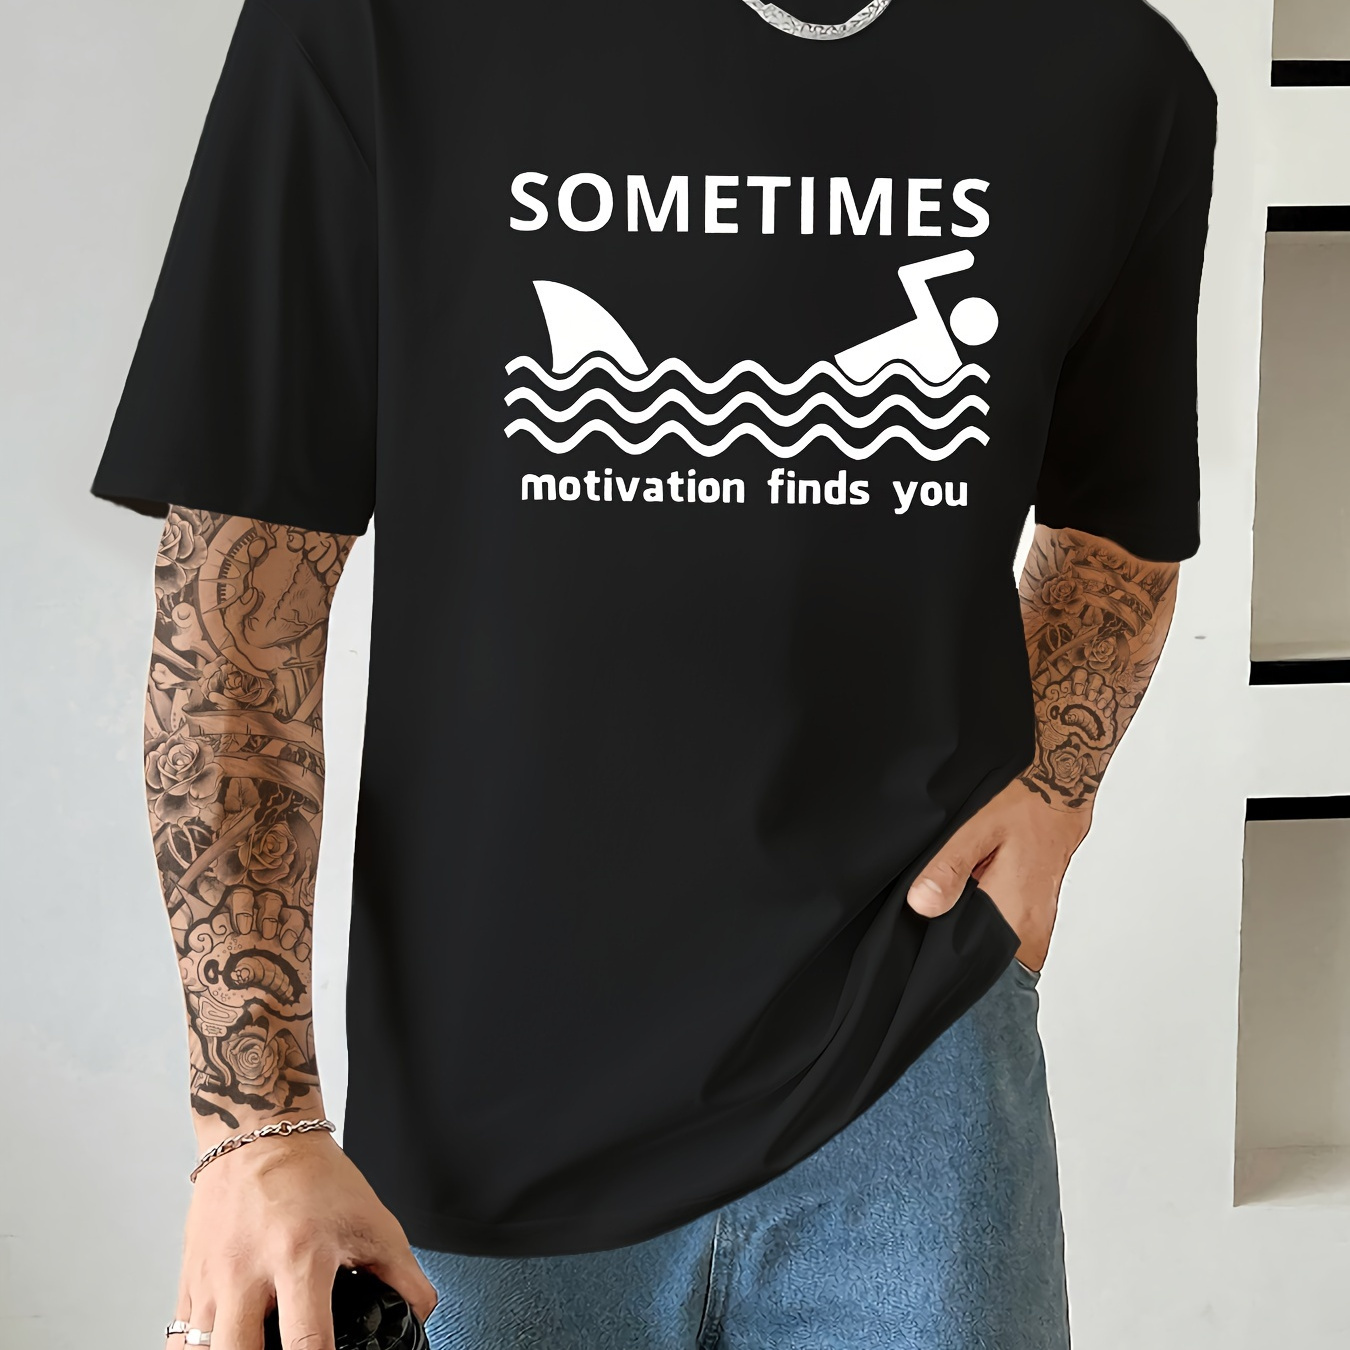 

Sometimes Motivation Finds You Print T Shirt, Tees For Men, Casual Short Sleeve T-shirt For Summer